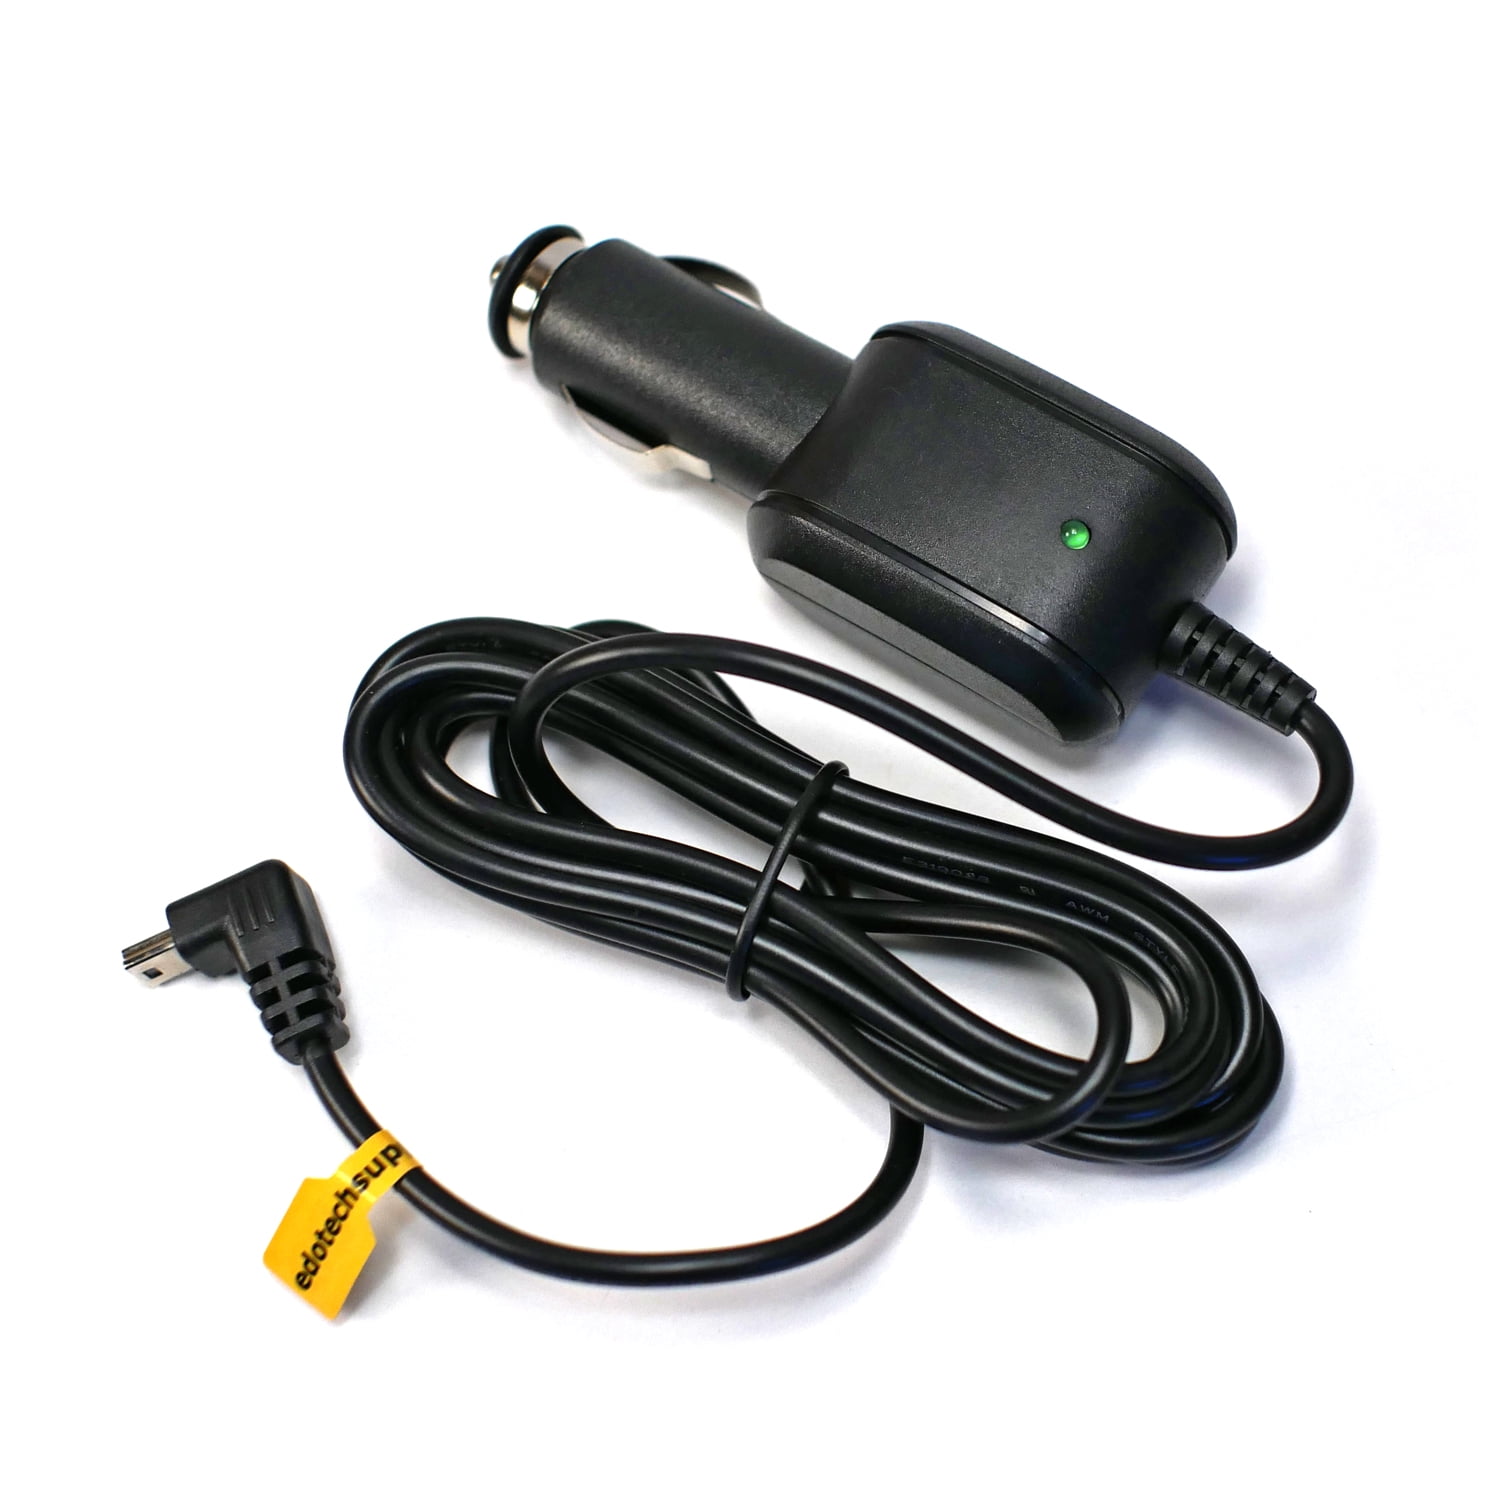 Eptech Car Charger for Garmin Nuvi Nüvi 1100 1100lm 1200 1250 1260t 1300 1300lm 1300lmt 1350lmt 1350t 1370t 1390 1390lmt 1390t 1450 1450lmt 1480t 1490lmt 1490t 1690t 2250 2300 2450lm 2460lmt 3790t 